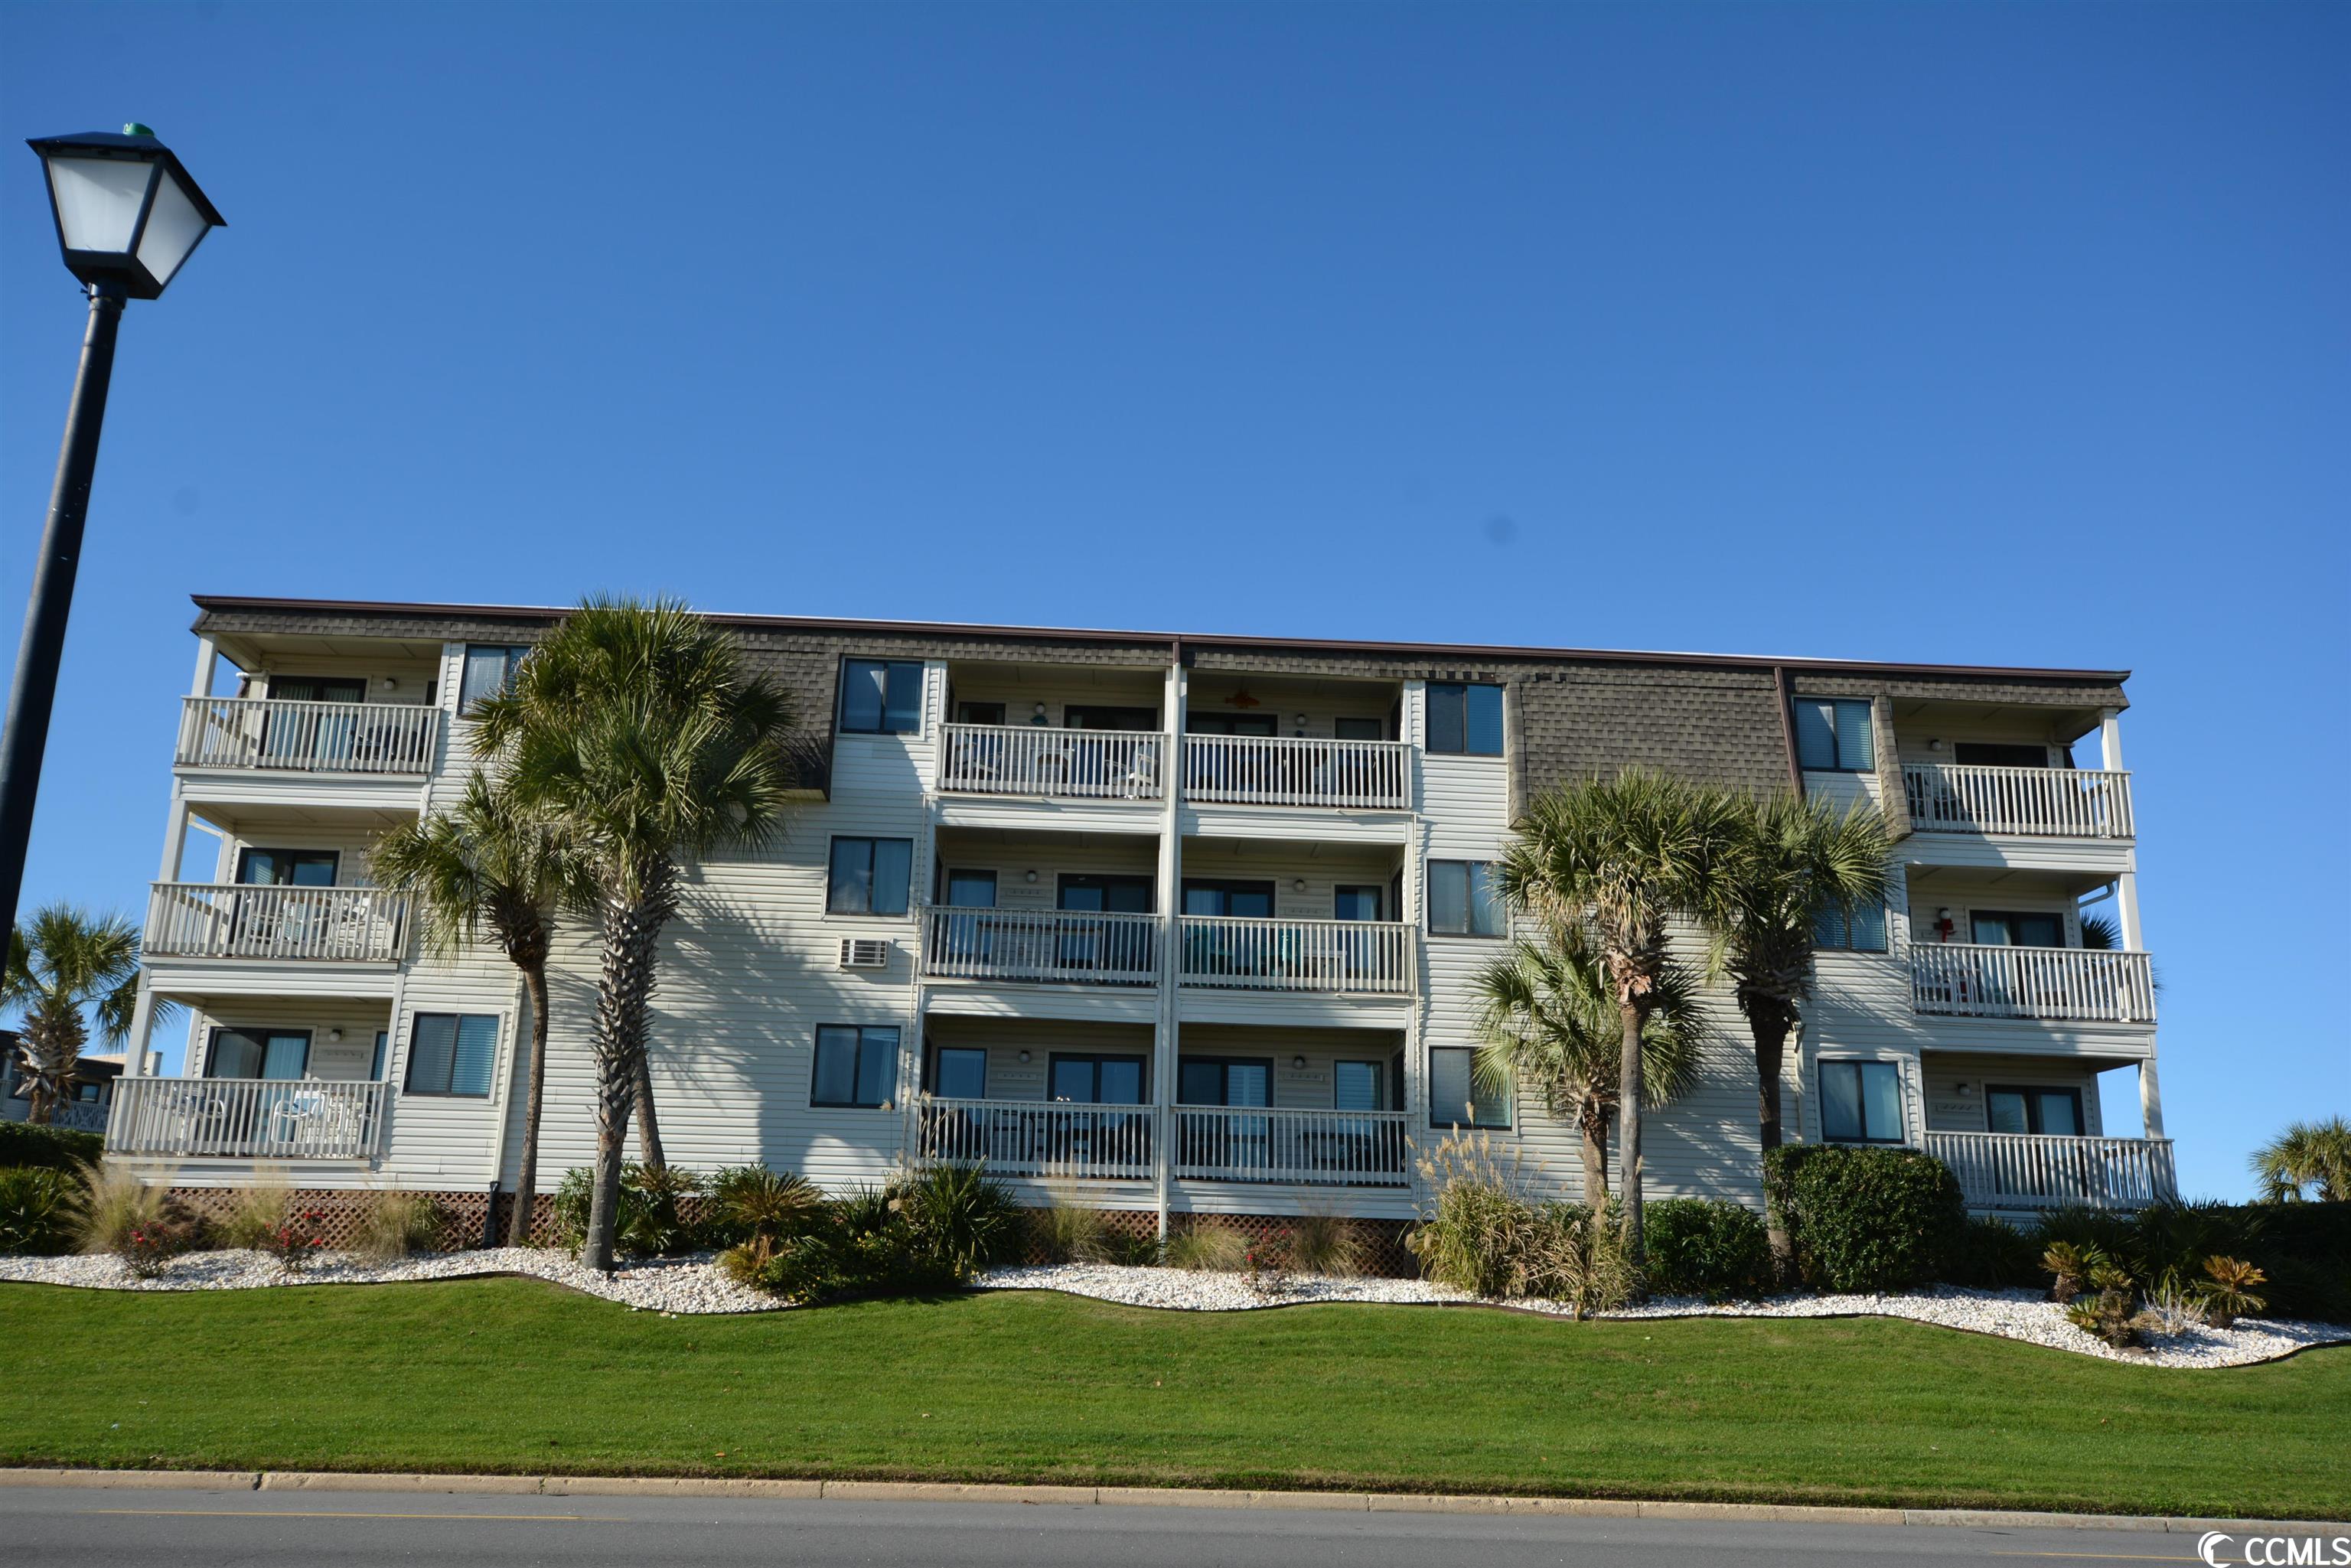 must see...this spectacular unit is move in ready and in great condition, new appliances, upgraded heating and cooling system, nicely furnished and located in on the most prestigious sections on the beach in myrtle beach. the golden mile is well know by many single family homeowners who require the best of the best in locations on the ocean. this unit is in an ocean front building but also one of the very few 1st floor direct ocean front units in the complex. great views of the atlantic from the master bedroom as well as the living and dining areas. very good rental history and a location that is highly in demand for vacationer's who love peace and quite, large beaches, nice pools and very low traffic. there are very few high rise condos and hotels in this area as it is mostly single family beach homes so the beaches are large and are never crowded. if you are an investor who also loves to spend time at the beach or looking for a permanent place to live on the ocean it is the perfect choice for you. take a look and fall in love with the convenience to fantastic restaurants. shopping, myrtle beach shows and everything the grand strand area has to offer.